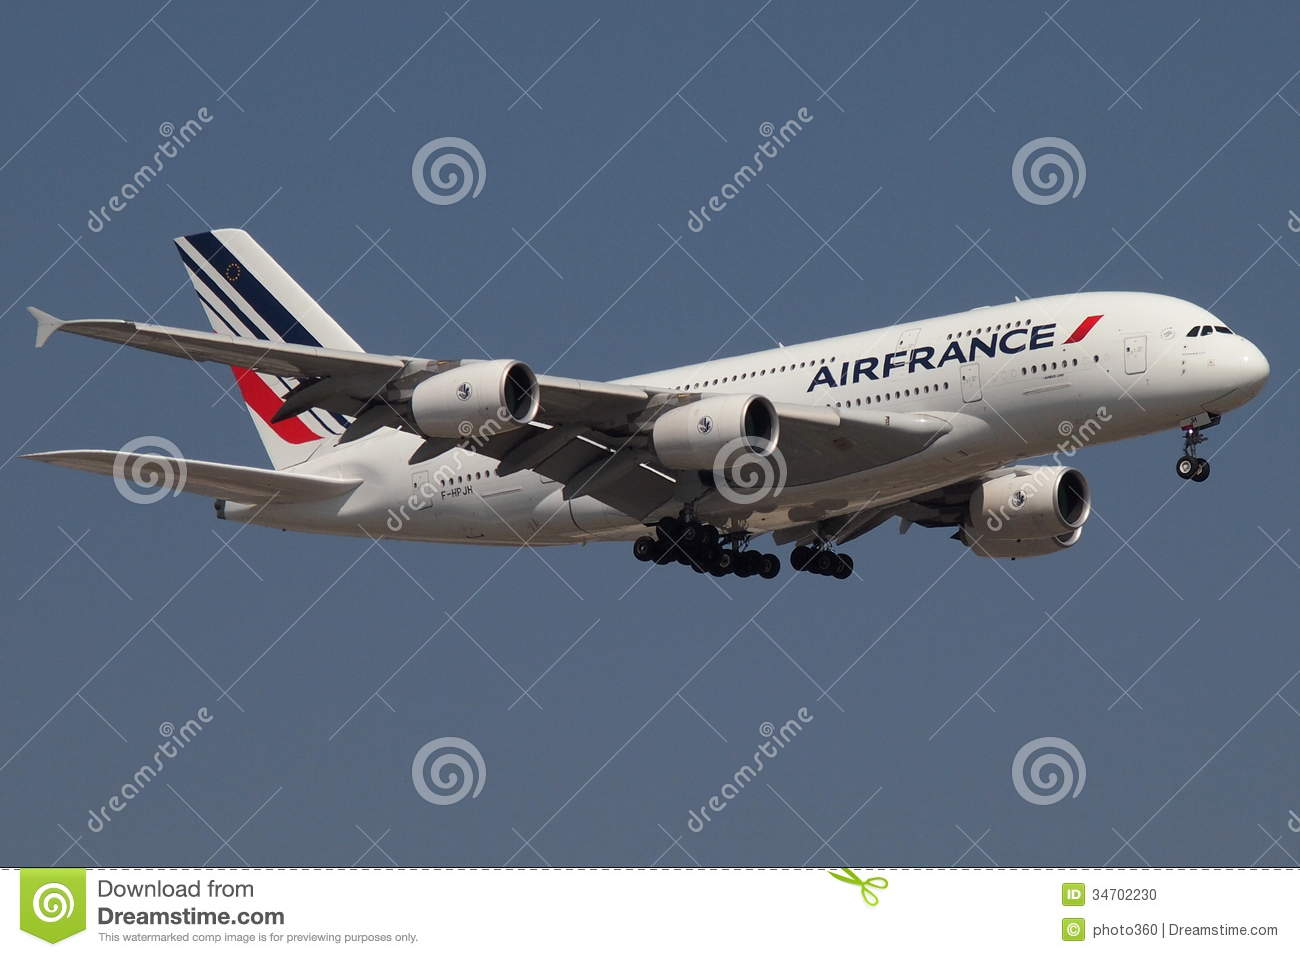 Airplane  Air France Is One Of Europe S Main Airlines And The Head Of